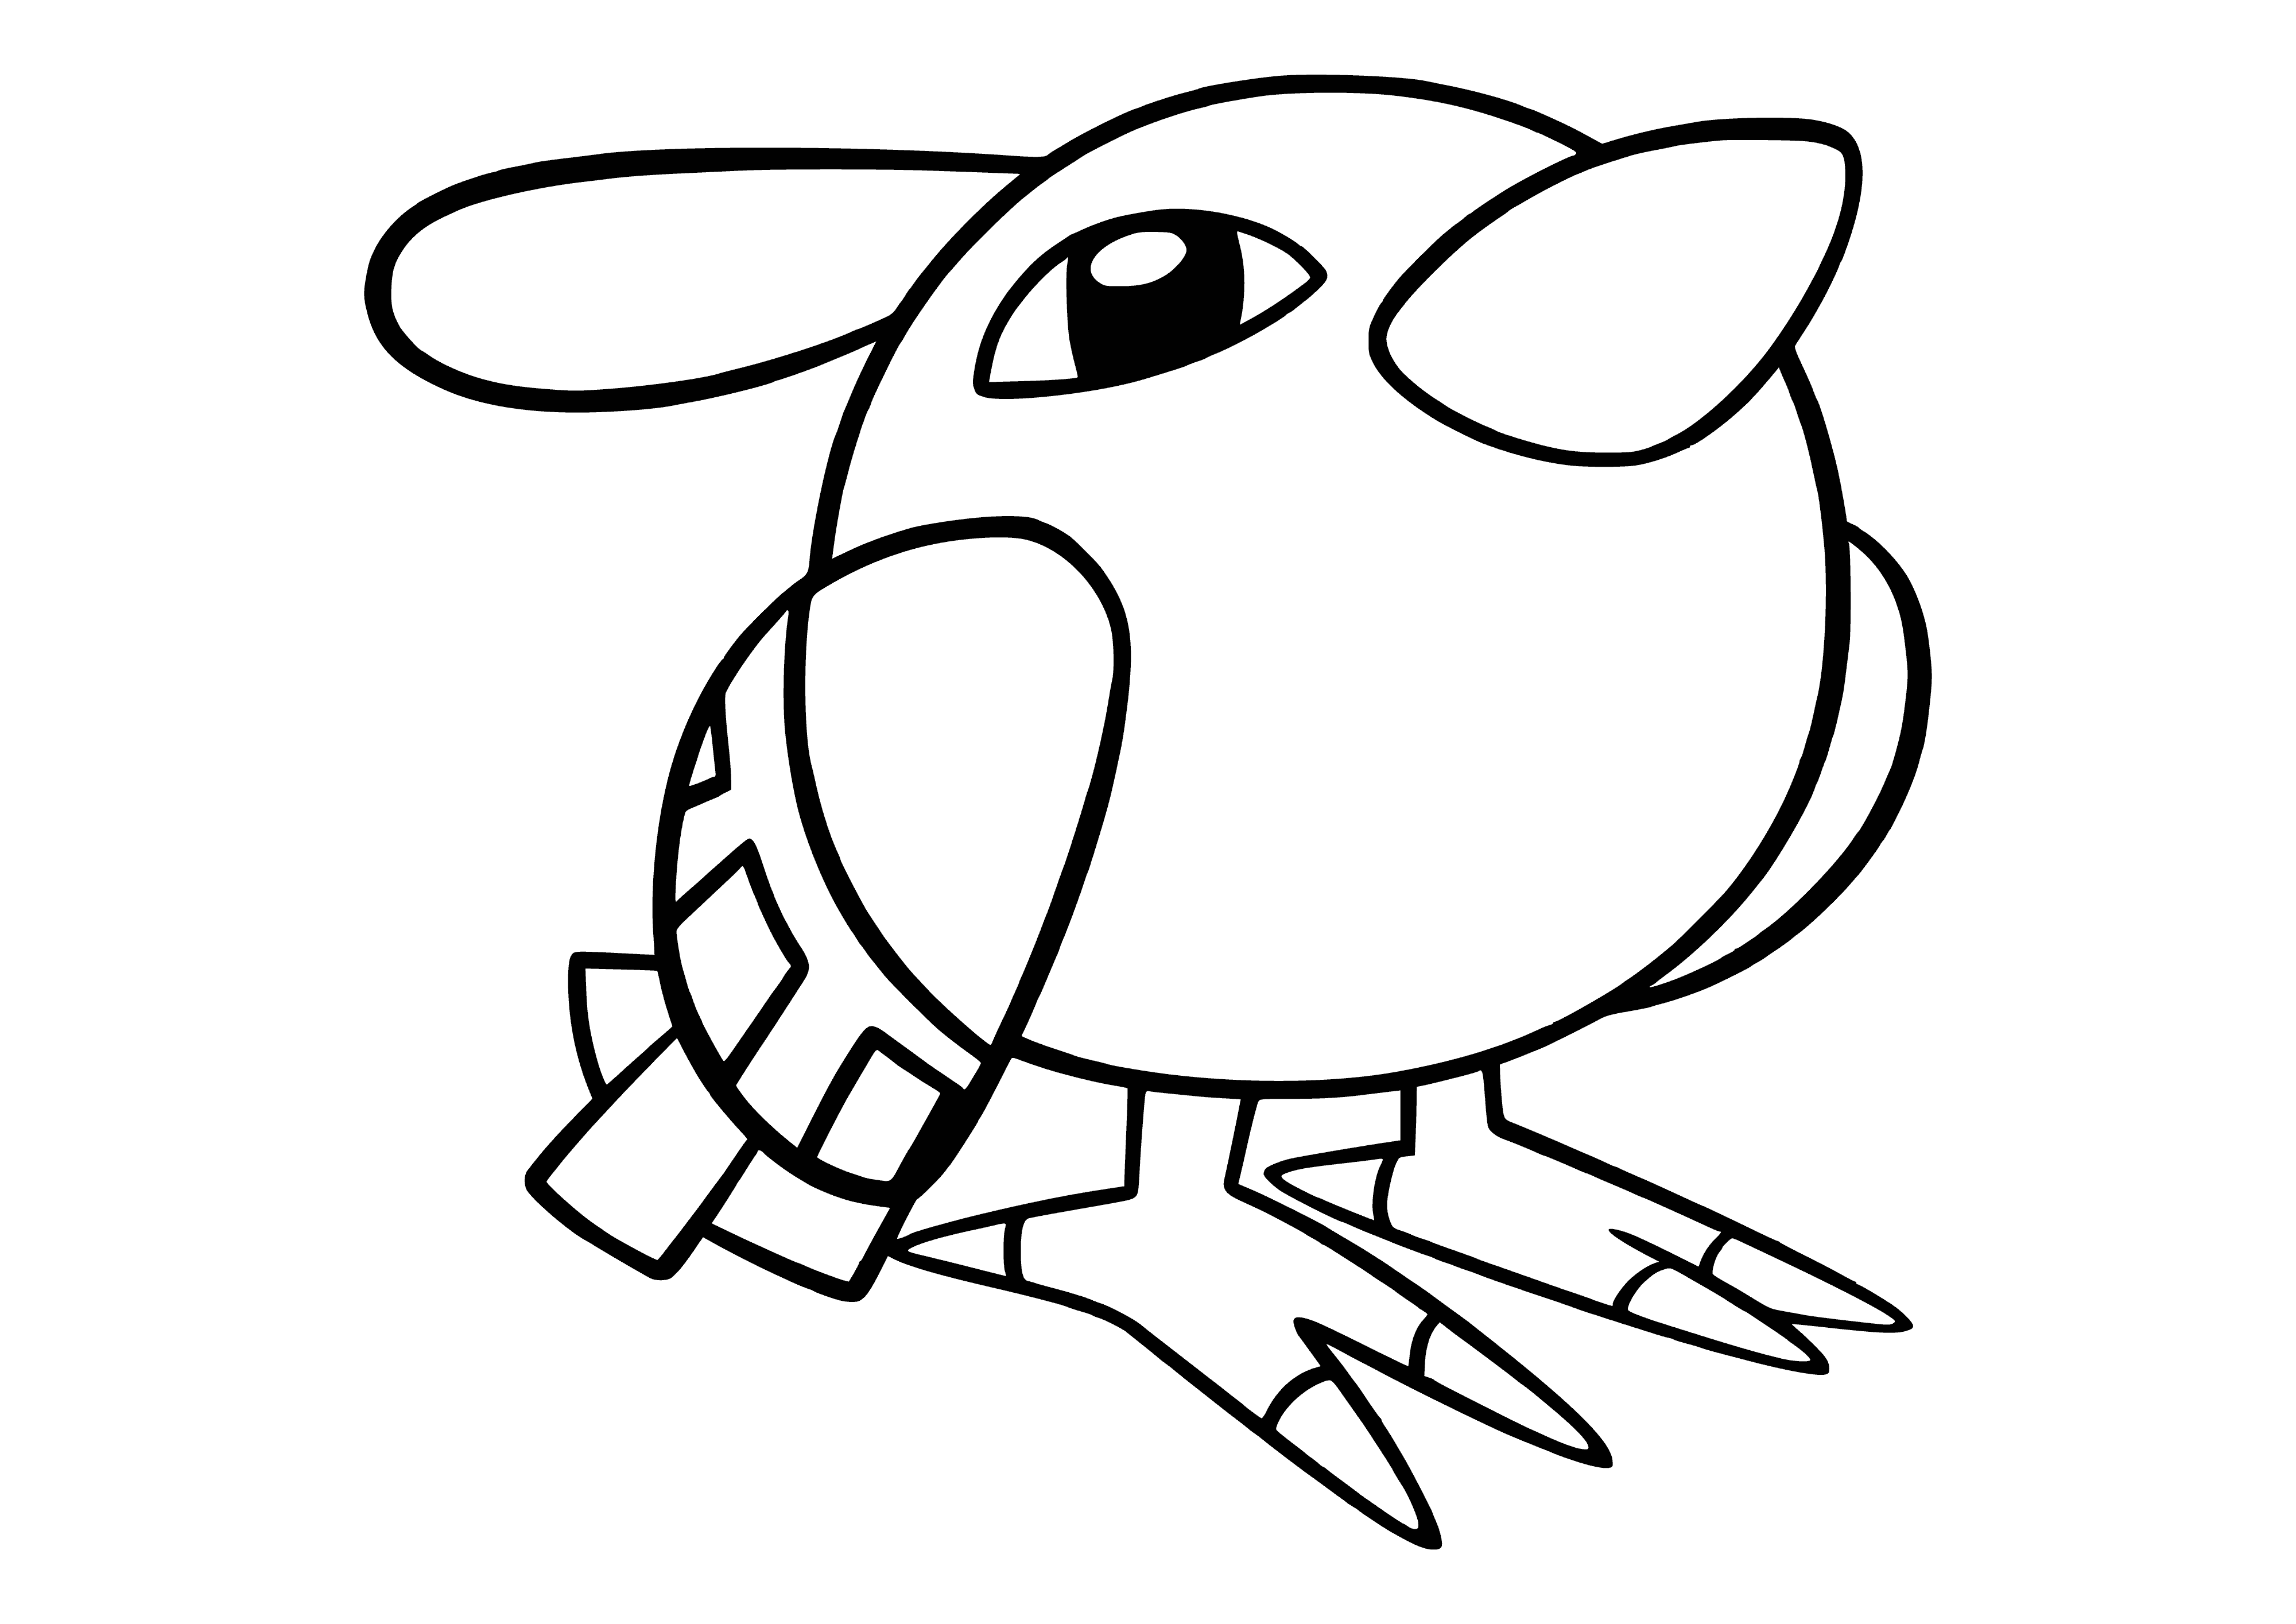 coloring page: Small, bird-like creature w/ round body, stubby wings, green head/back, black stripe running down back, large eyes & small beak. Wings & tail green w/ black stripes.